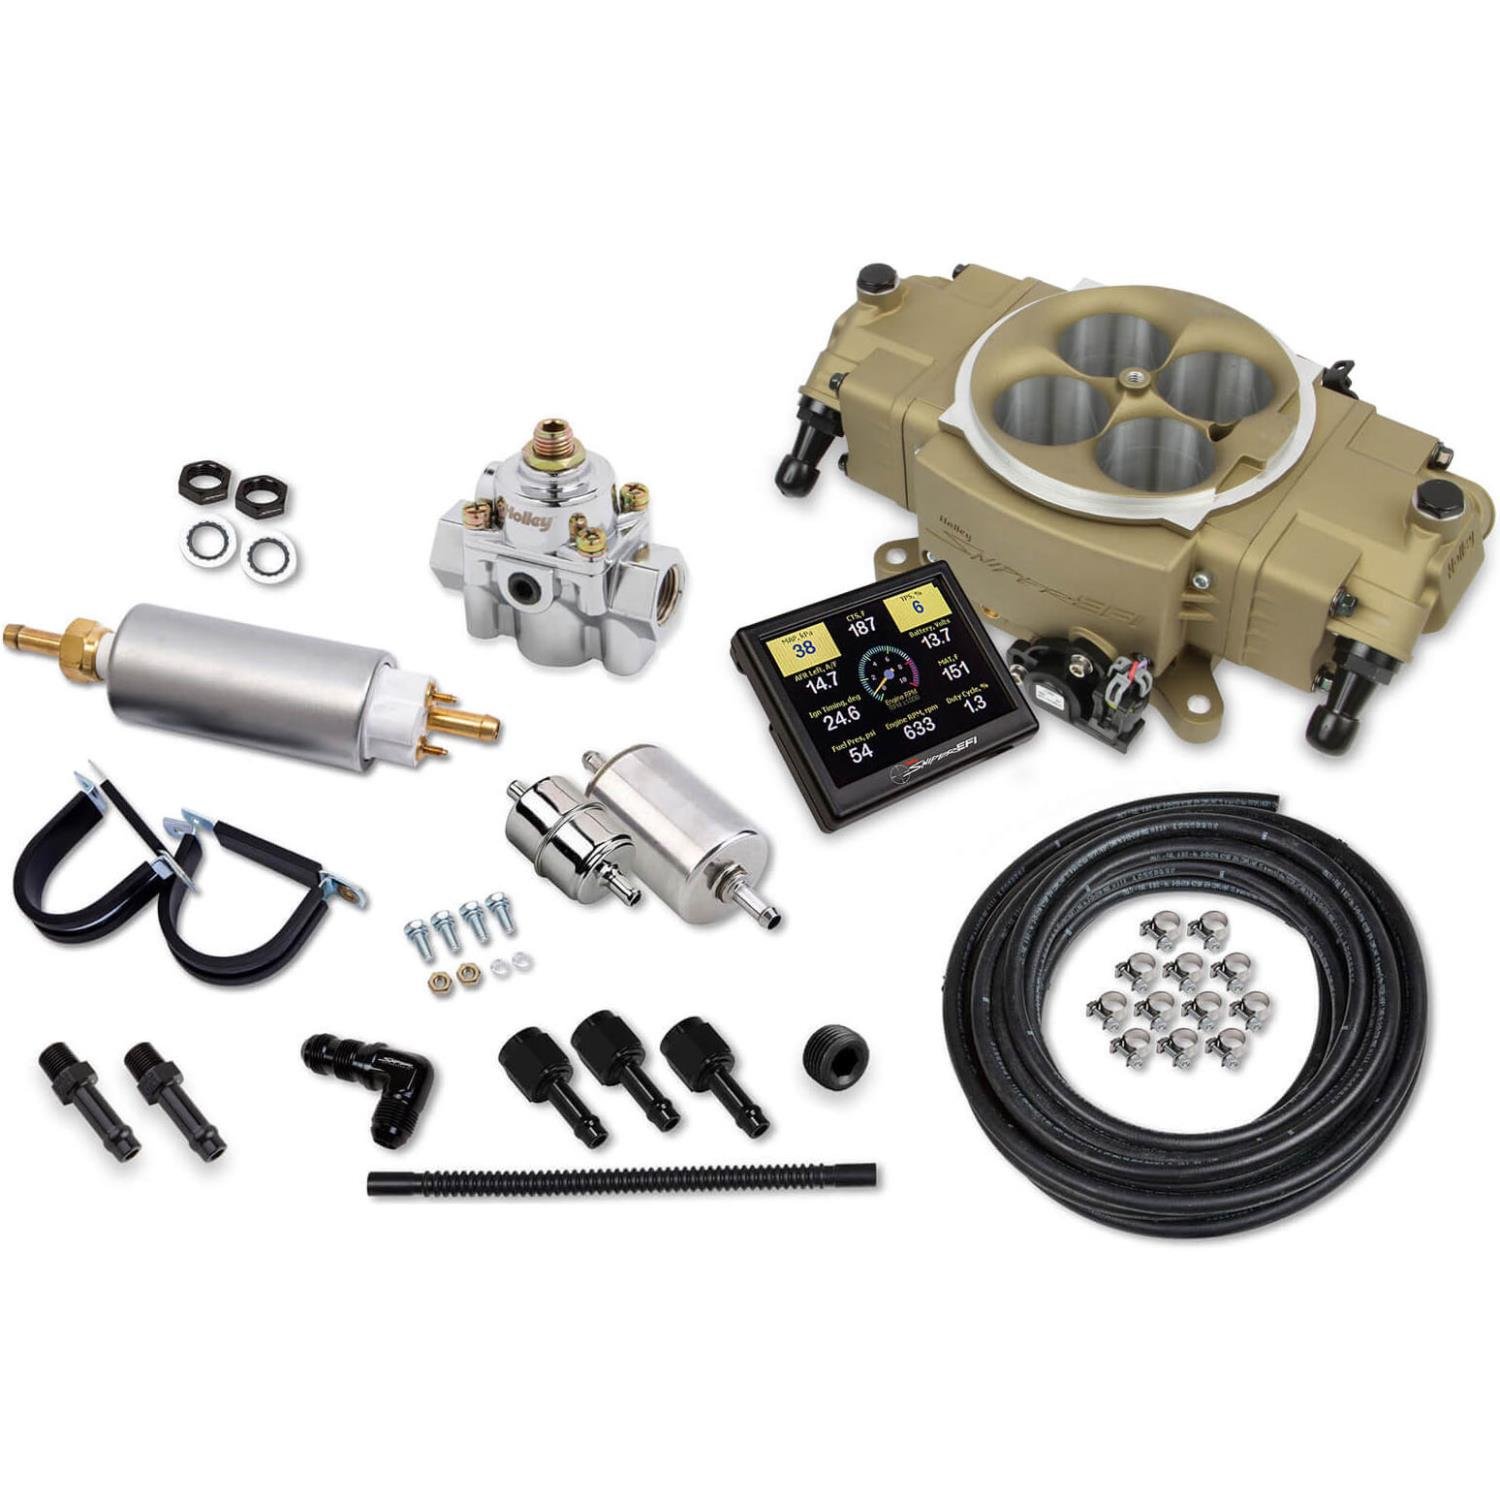 550-872K Sniper Stealth 4150 Self-Tuning Fuel Injection System Master Kit